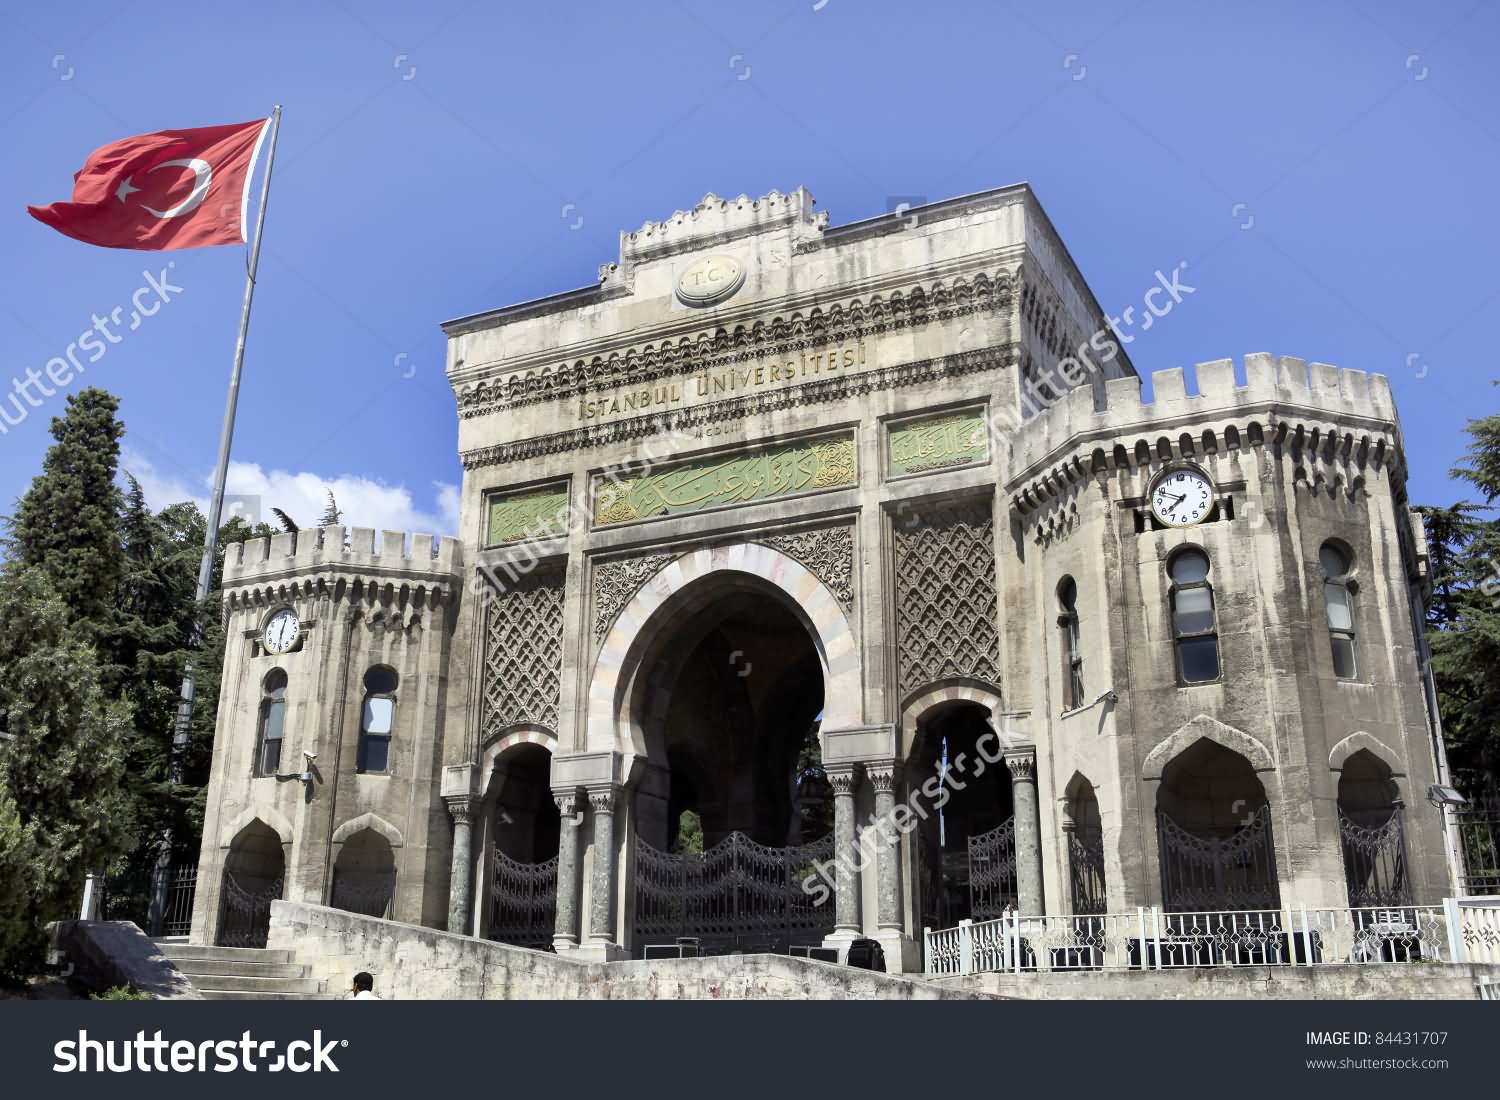 Istanbul University At The Beyazit Square In Istanbul, Turkey